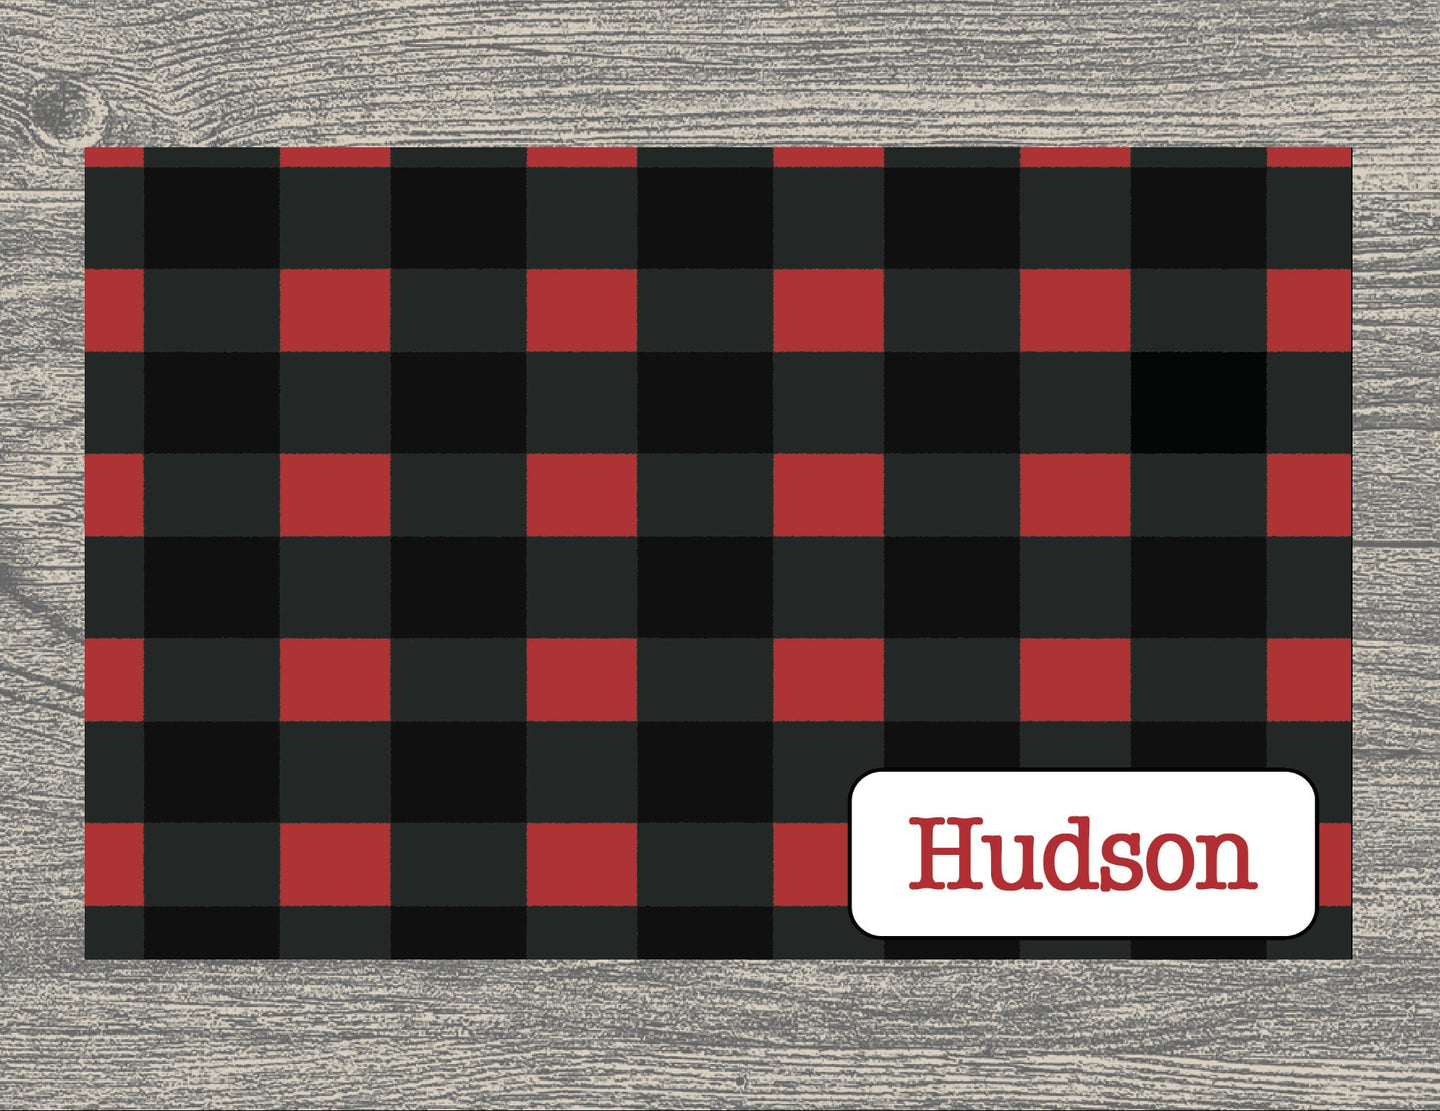 Plaid Christmas Placemat, Personalized Kids Placemat for kids, Red Holiday Placemat, Child Name Custom Placemat